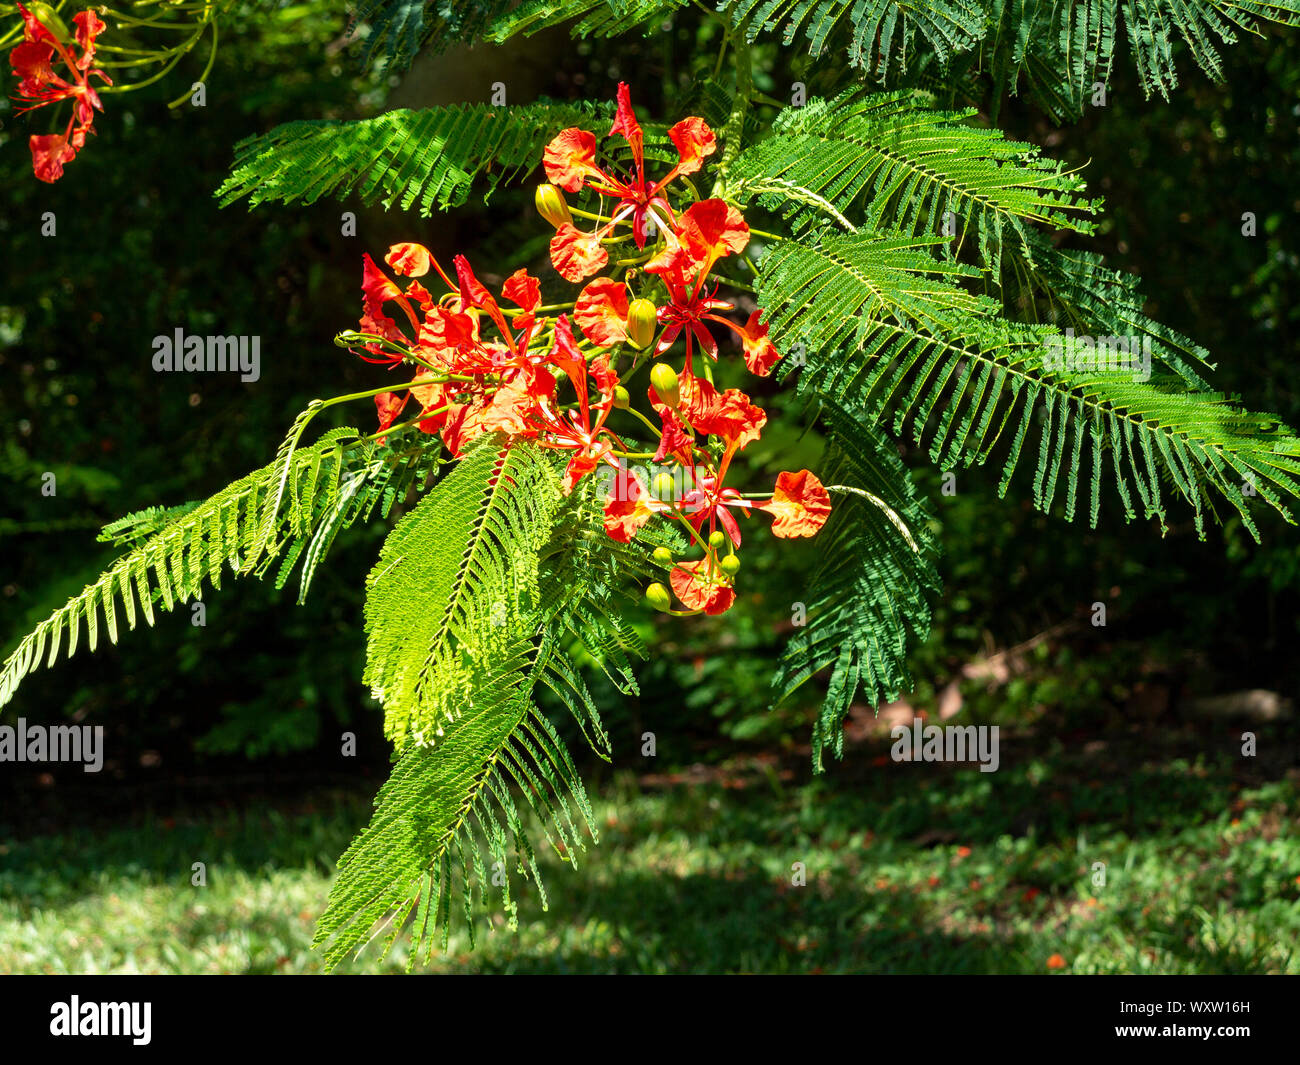 Close up areas of a flame tree in bloom, Bermuda Stock Photo